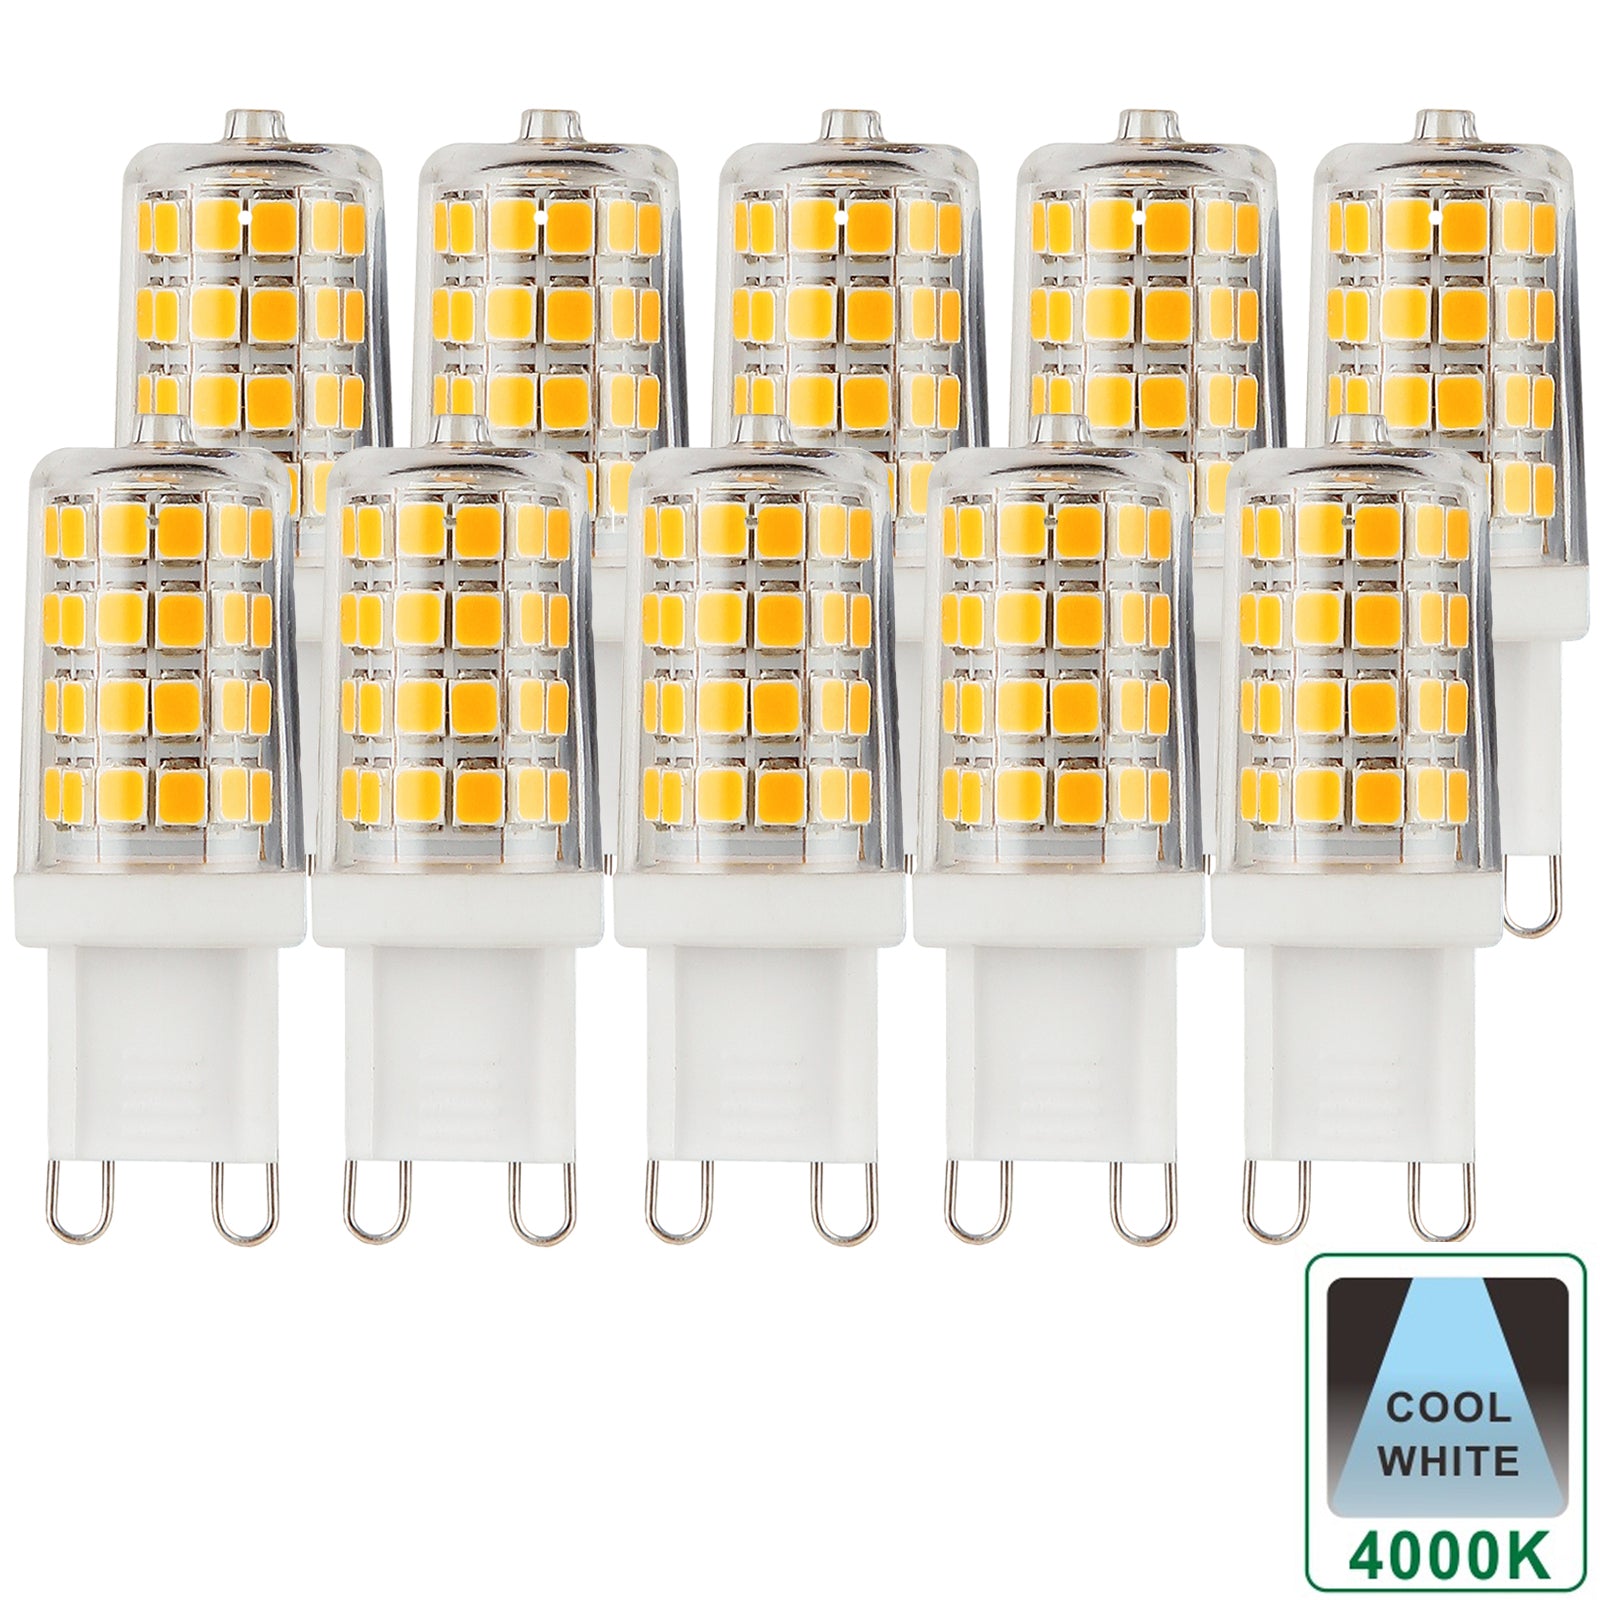 10 pack G9 Dimmable LED bulb